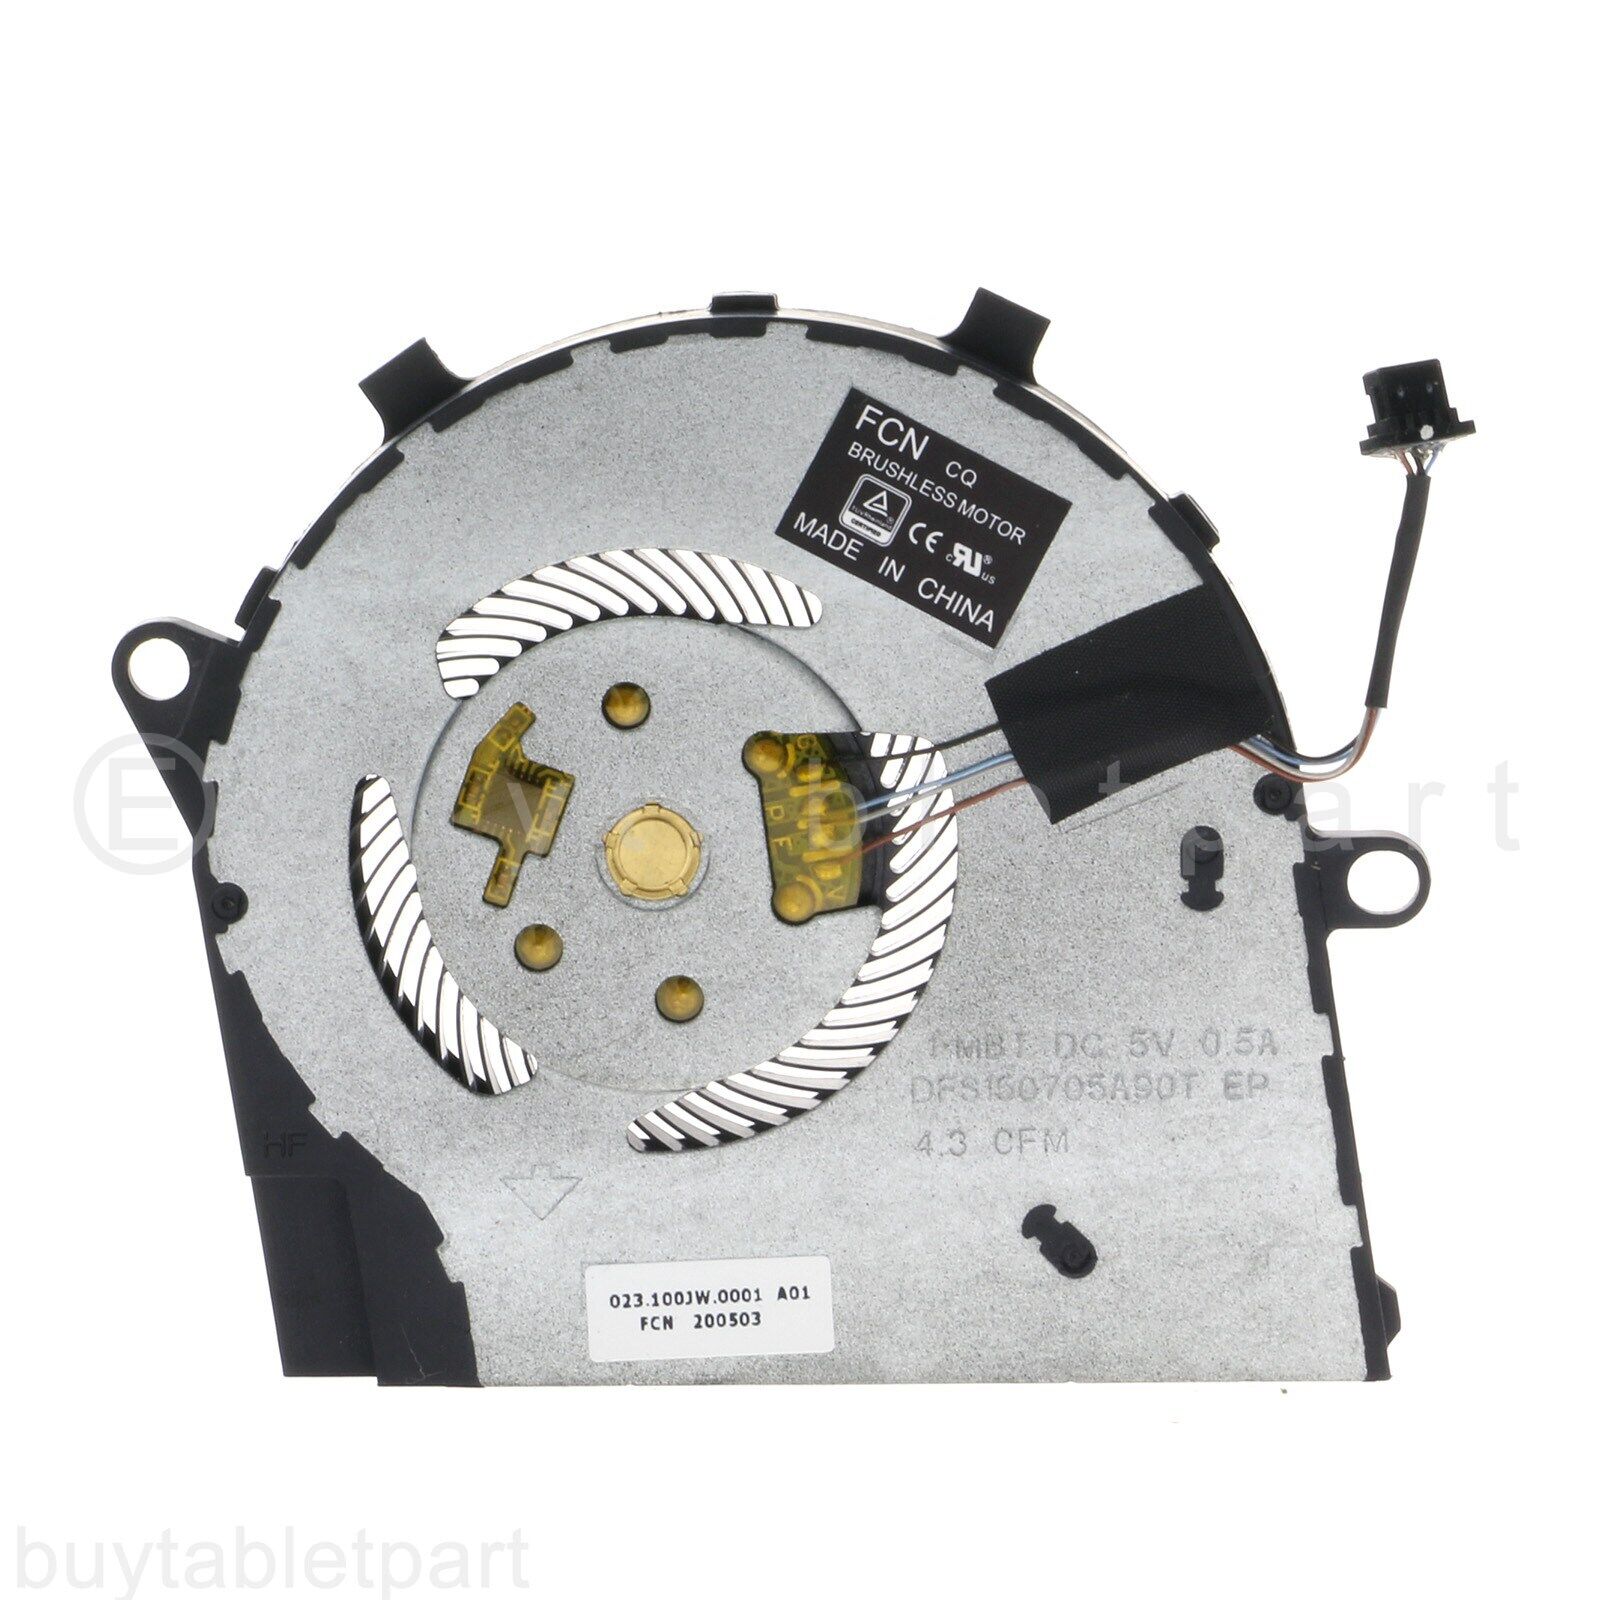 NEW CPU Cooling Fan For Dell Inspiron 14 5401 5402 5405 5408 Dell Vostro 14 5402